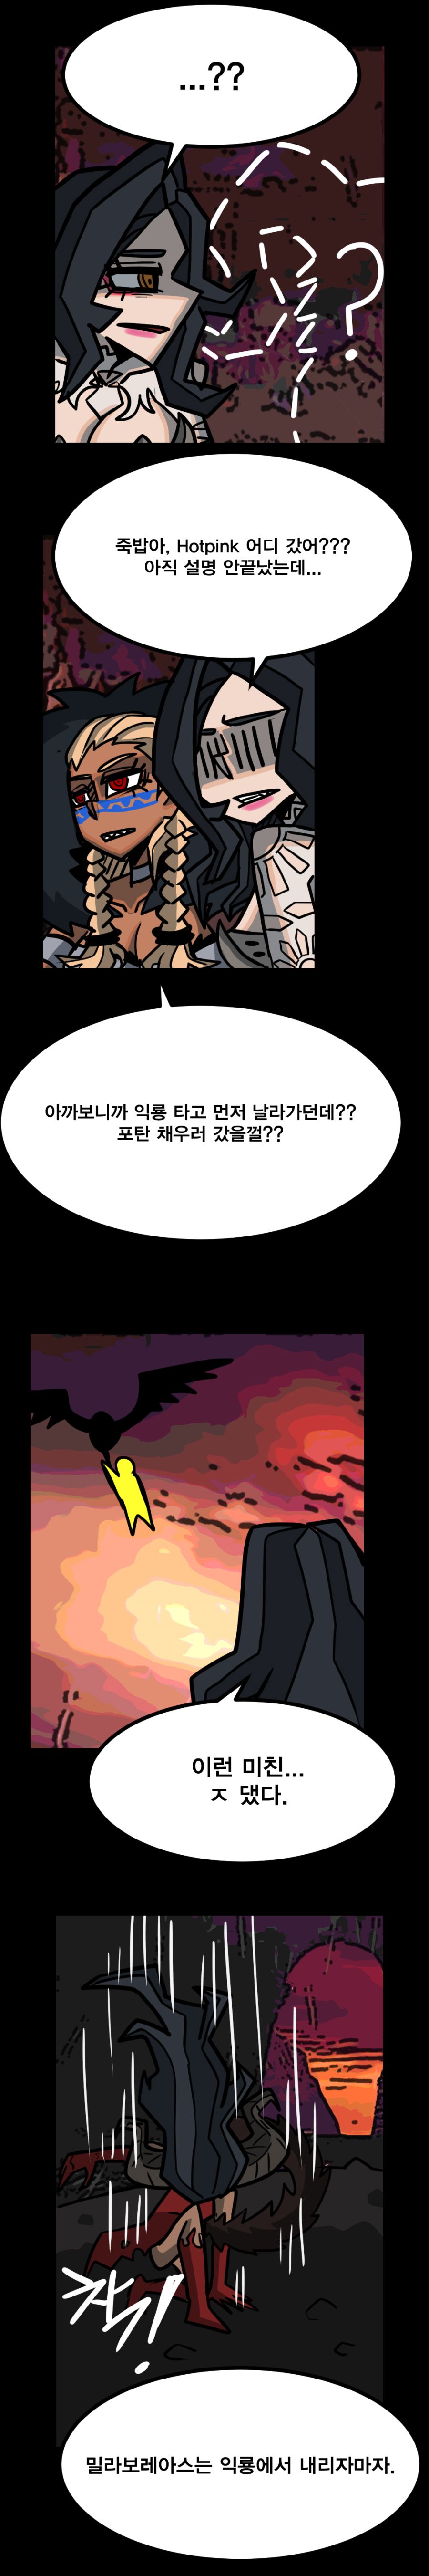 mh2-6완성.png